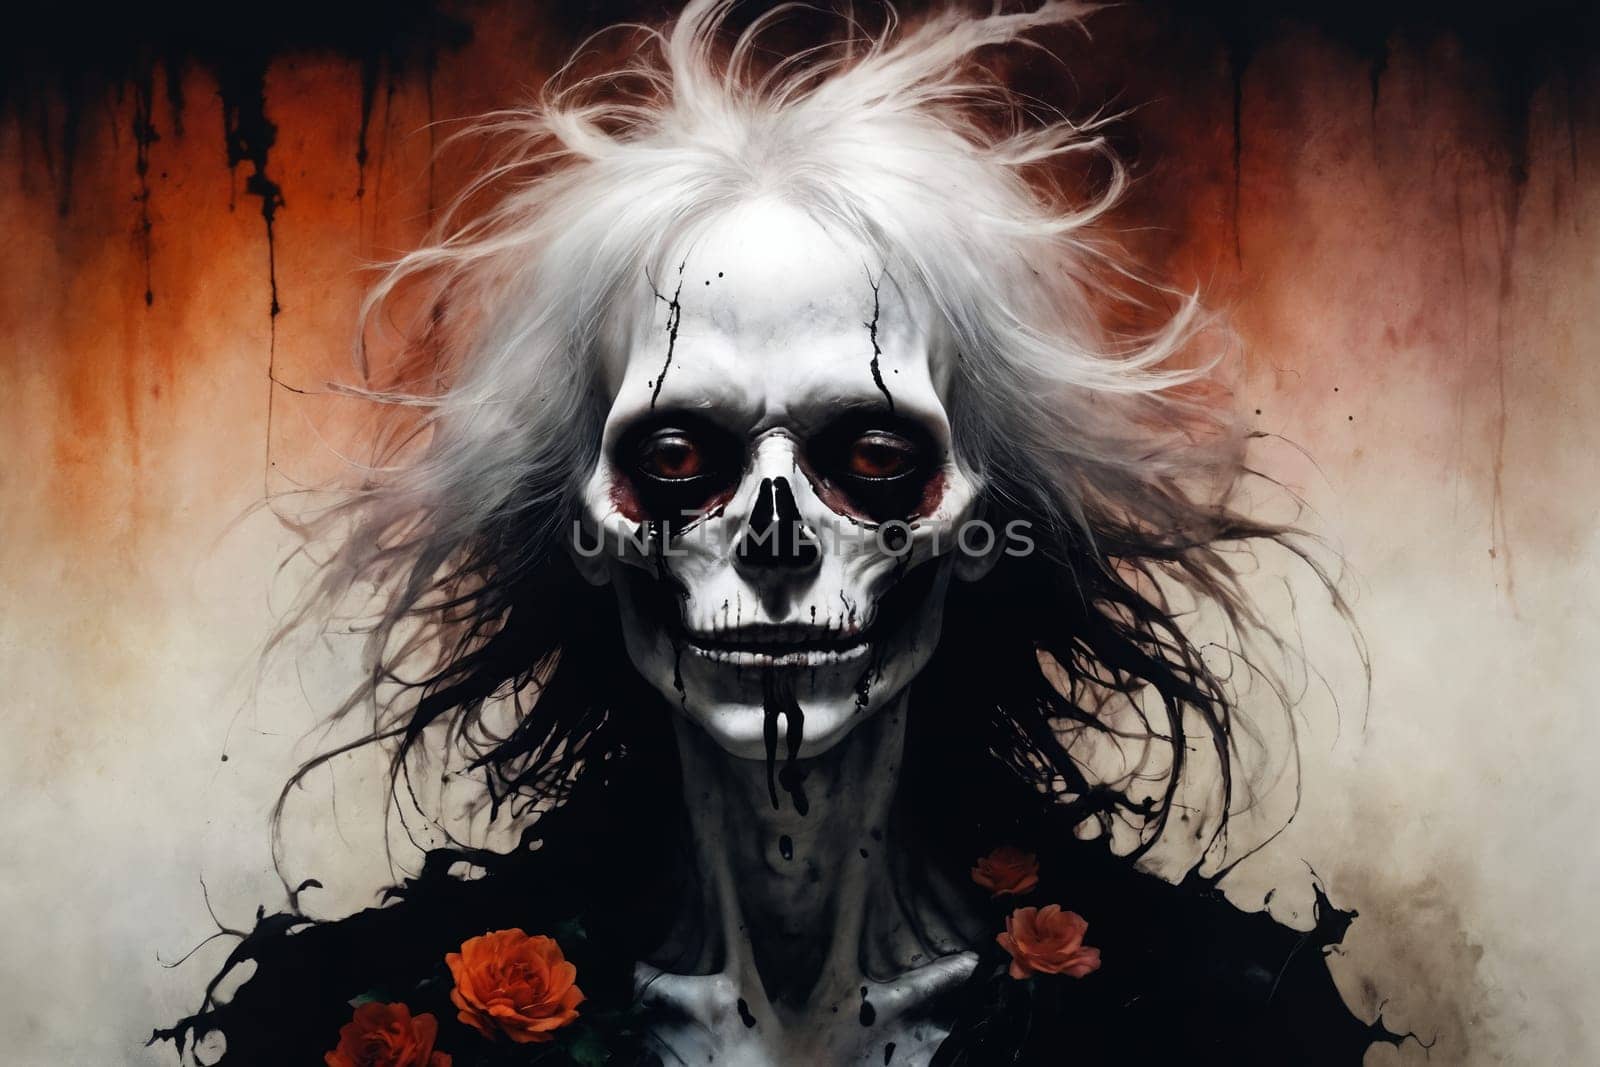 A figure with untamed white hair, wearing a dark garment with vivid orange rose details against an abstract warm-toned backdrop.